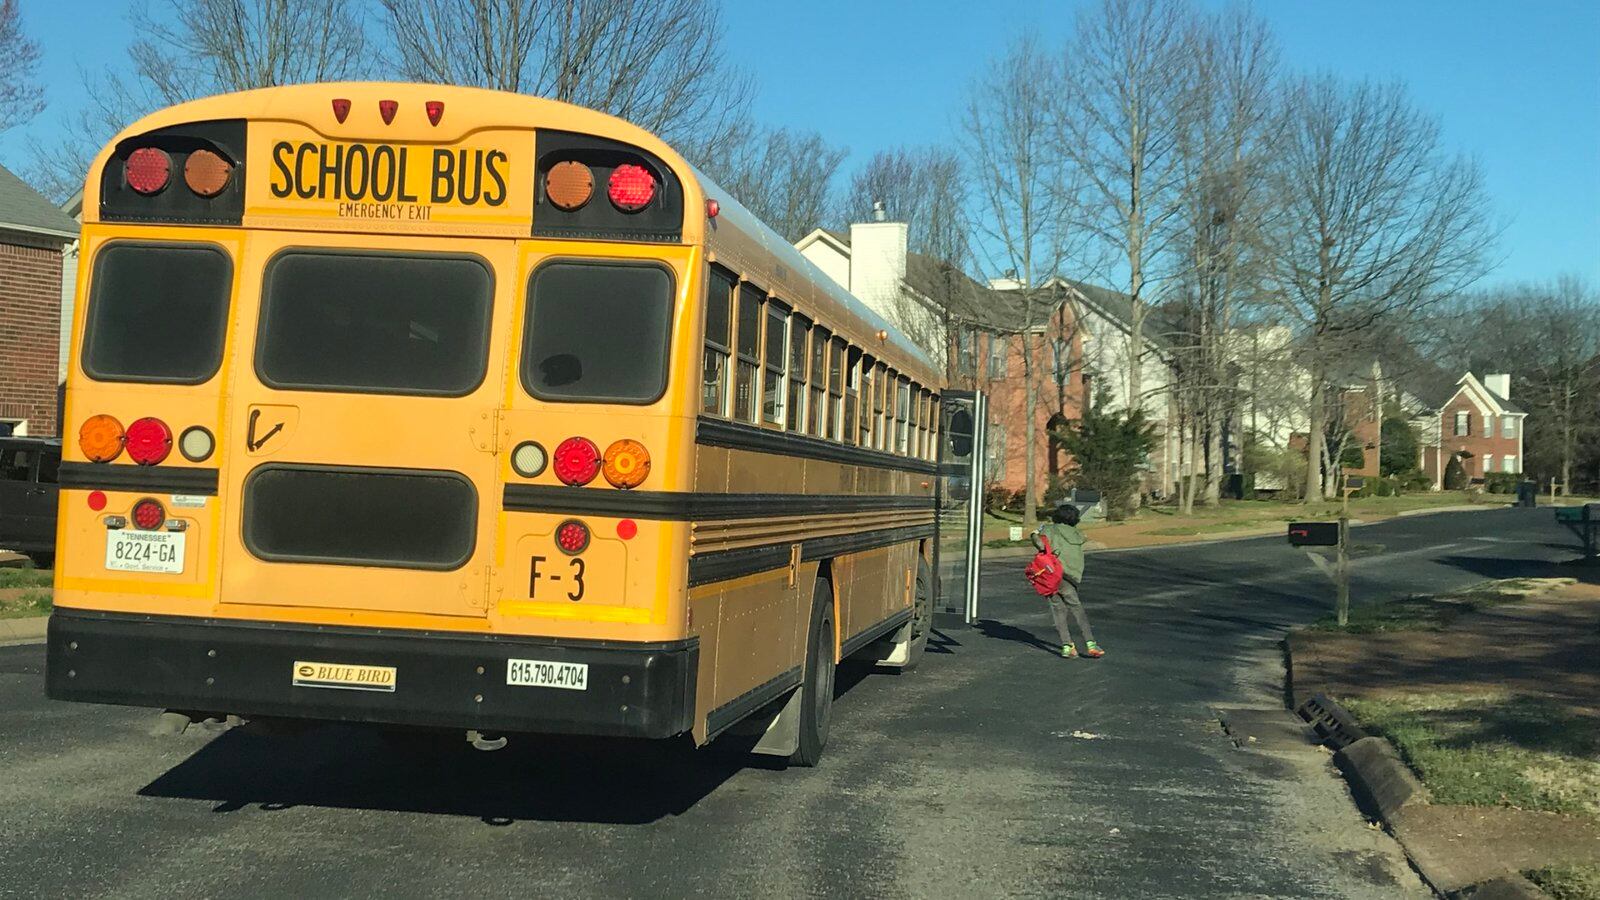 A student steps off the bus Thursday in Williamson County, where two school districts will be closed for two days after a resident was diagnosed with the new coronavirus. Williamson County is located south of Nashville.